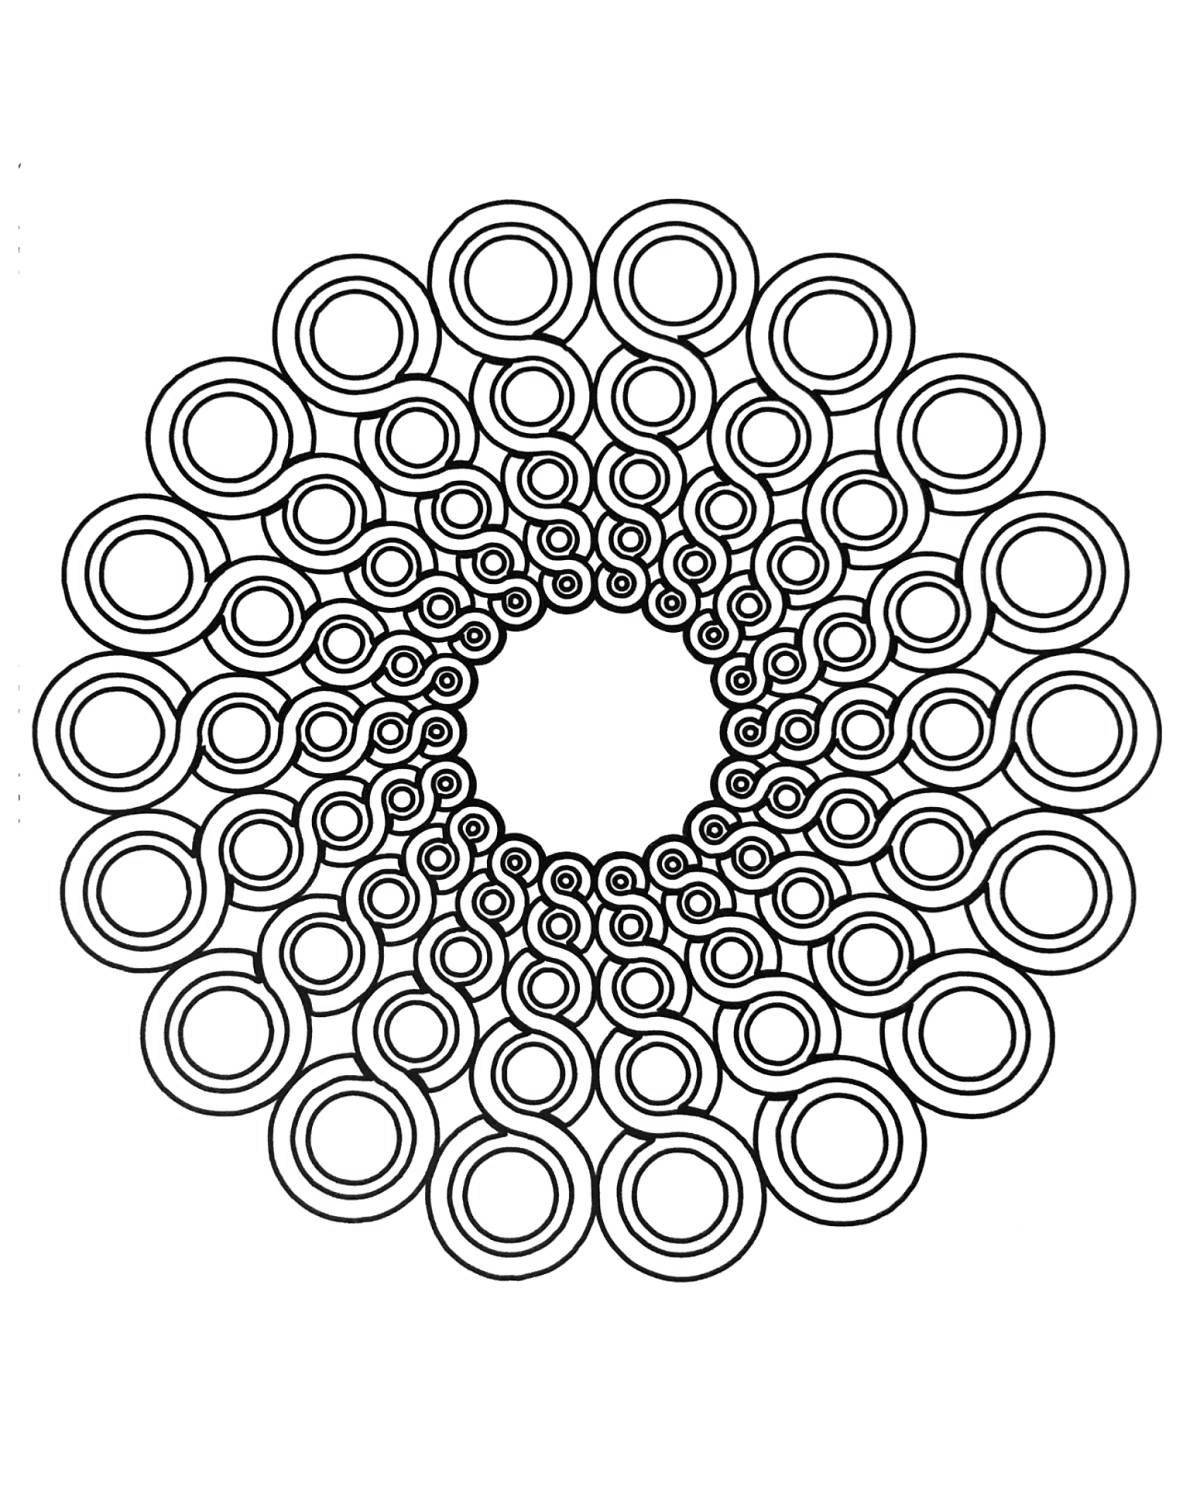 Coloring page of a spiral with an exquisite circular pattern